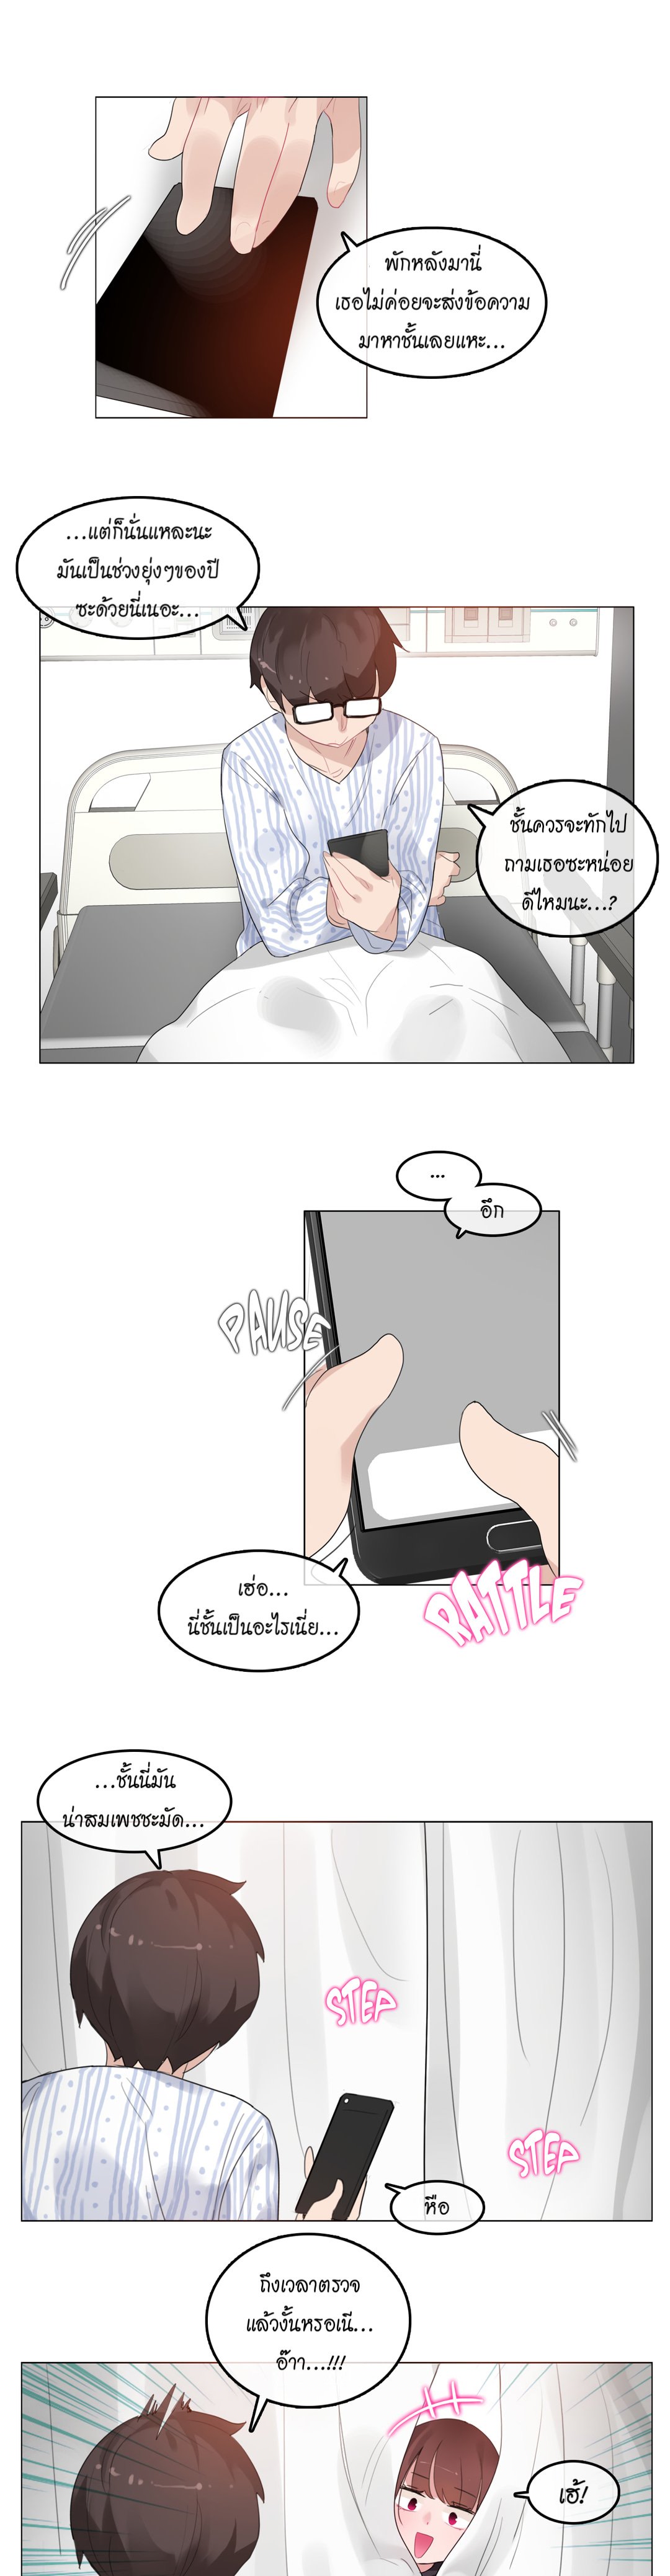 A Pervert’s Daily Life 50 07